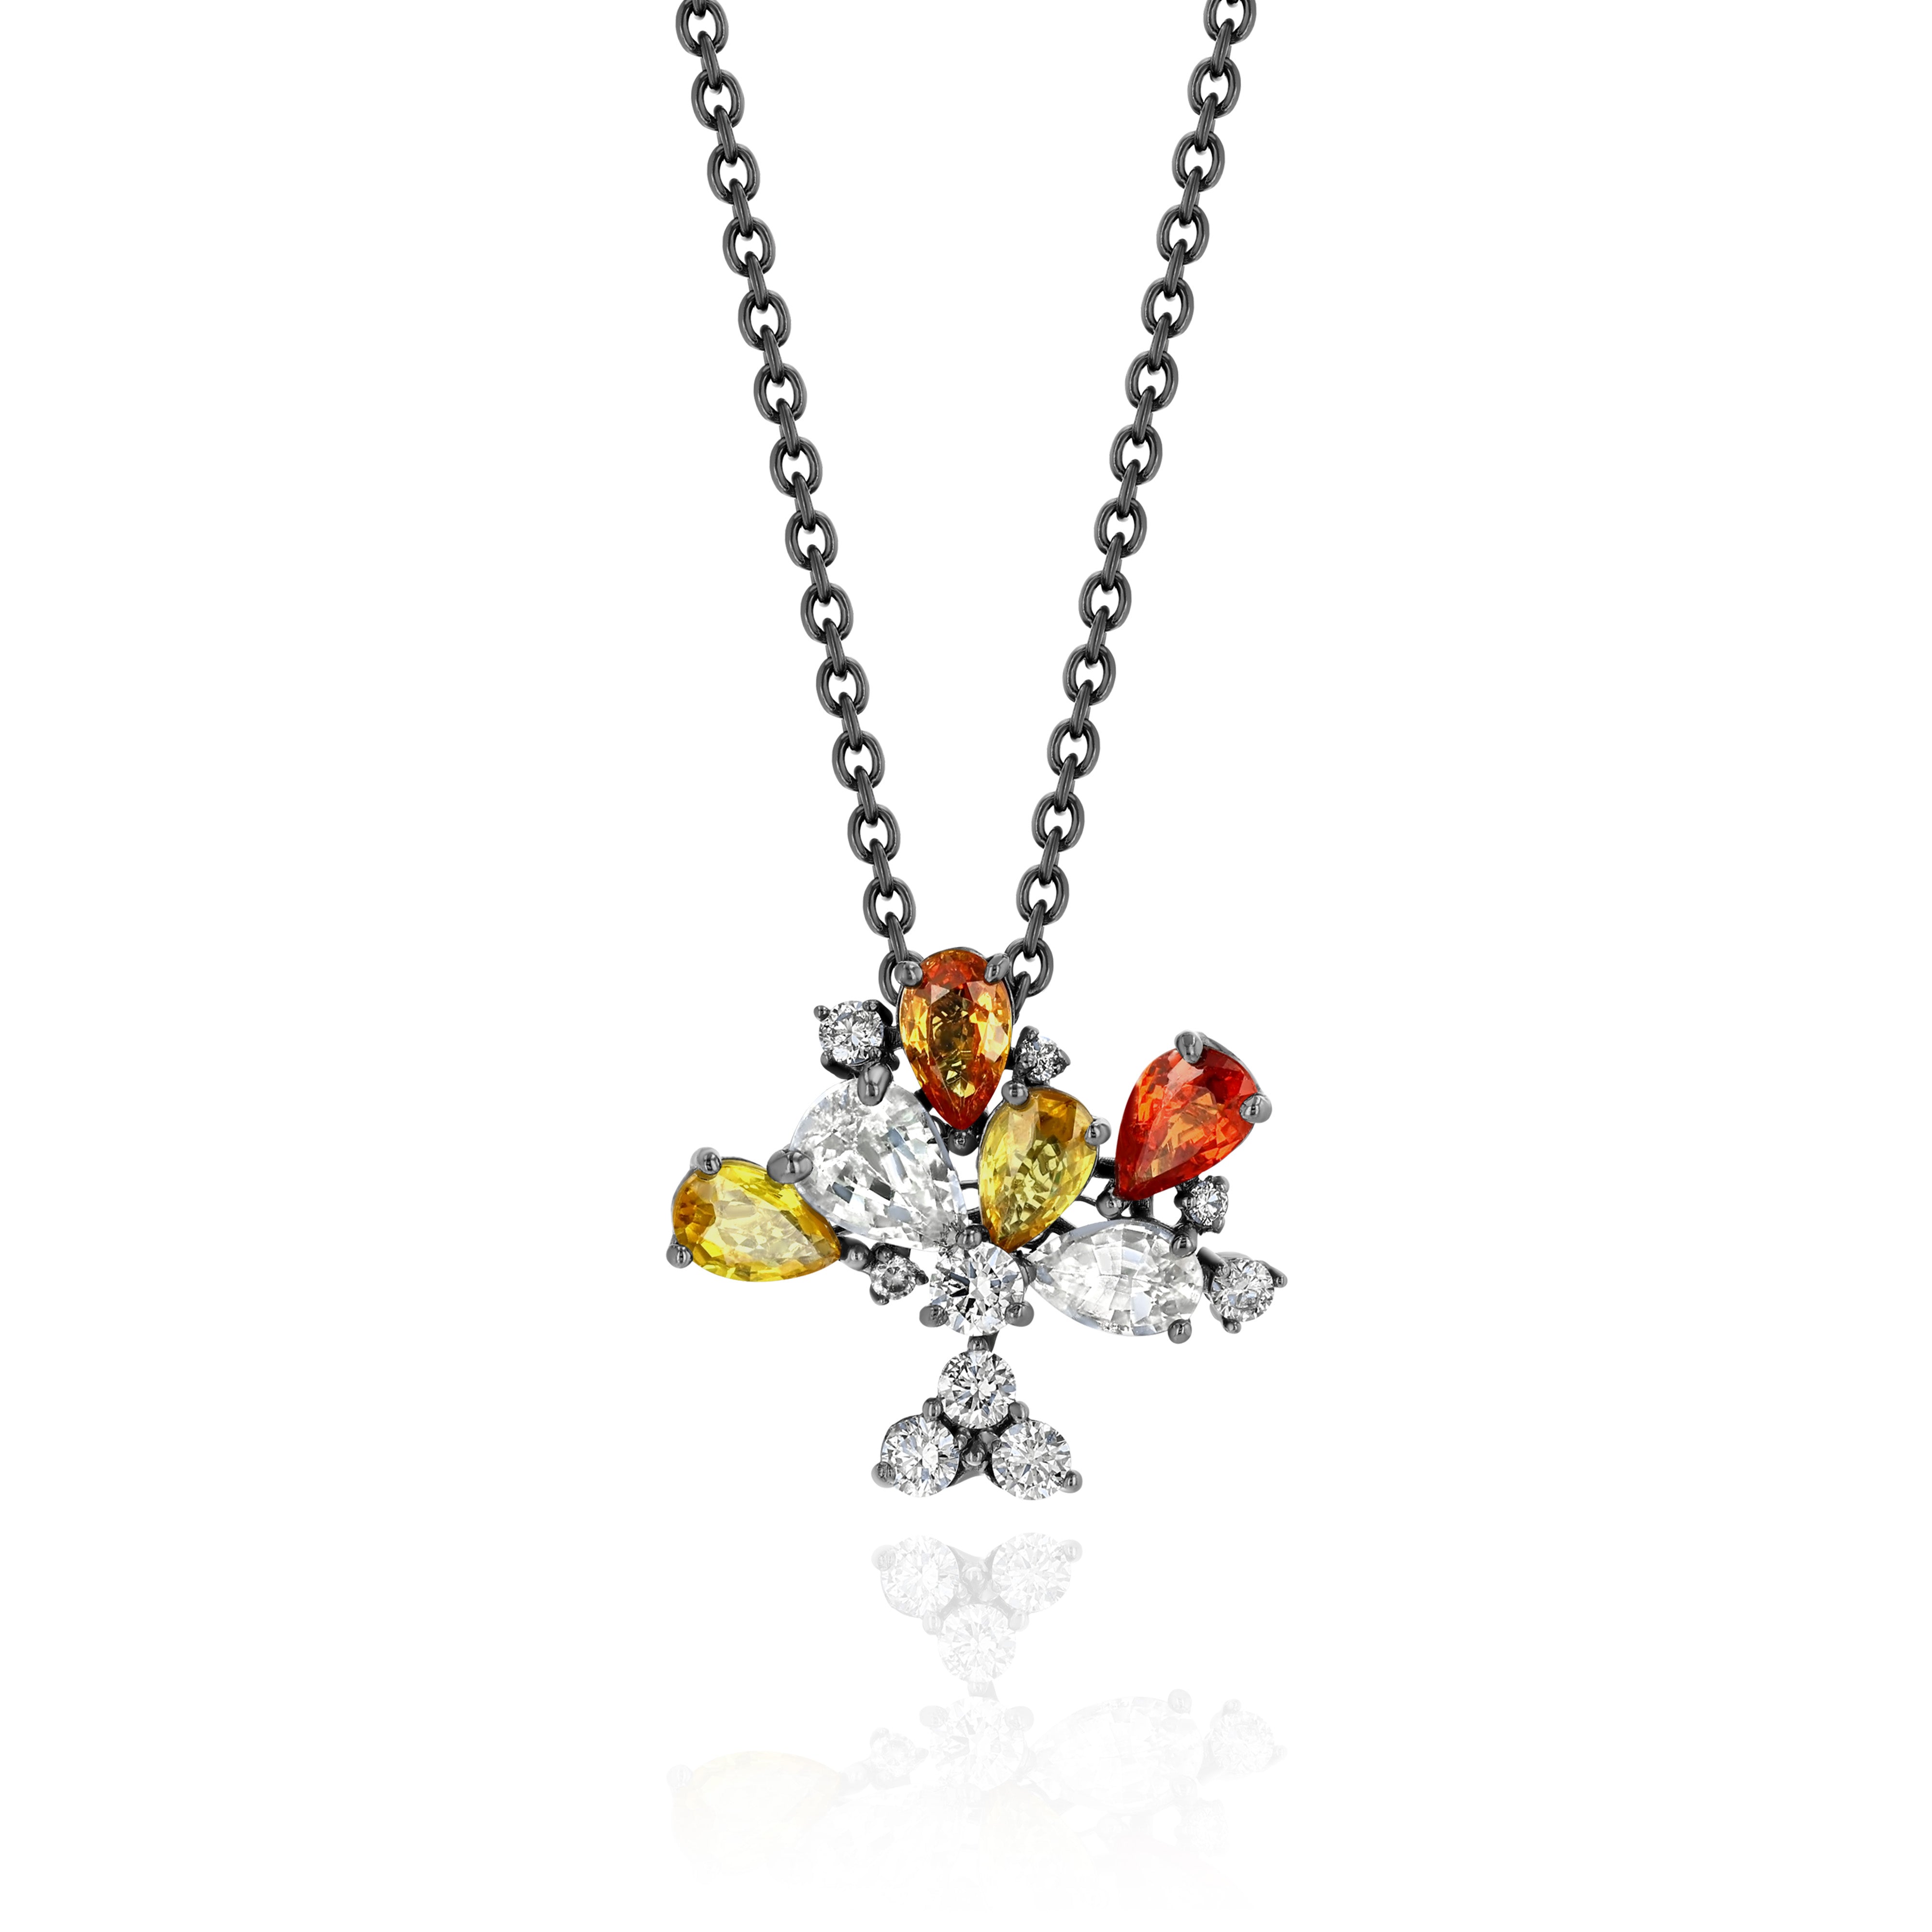 Rhodium Plated Gold Necklace with Orange, Yellow, and White Sapphires, and Diamonds, Small